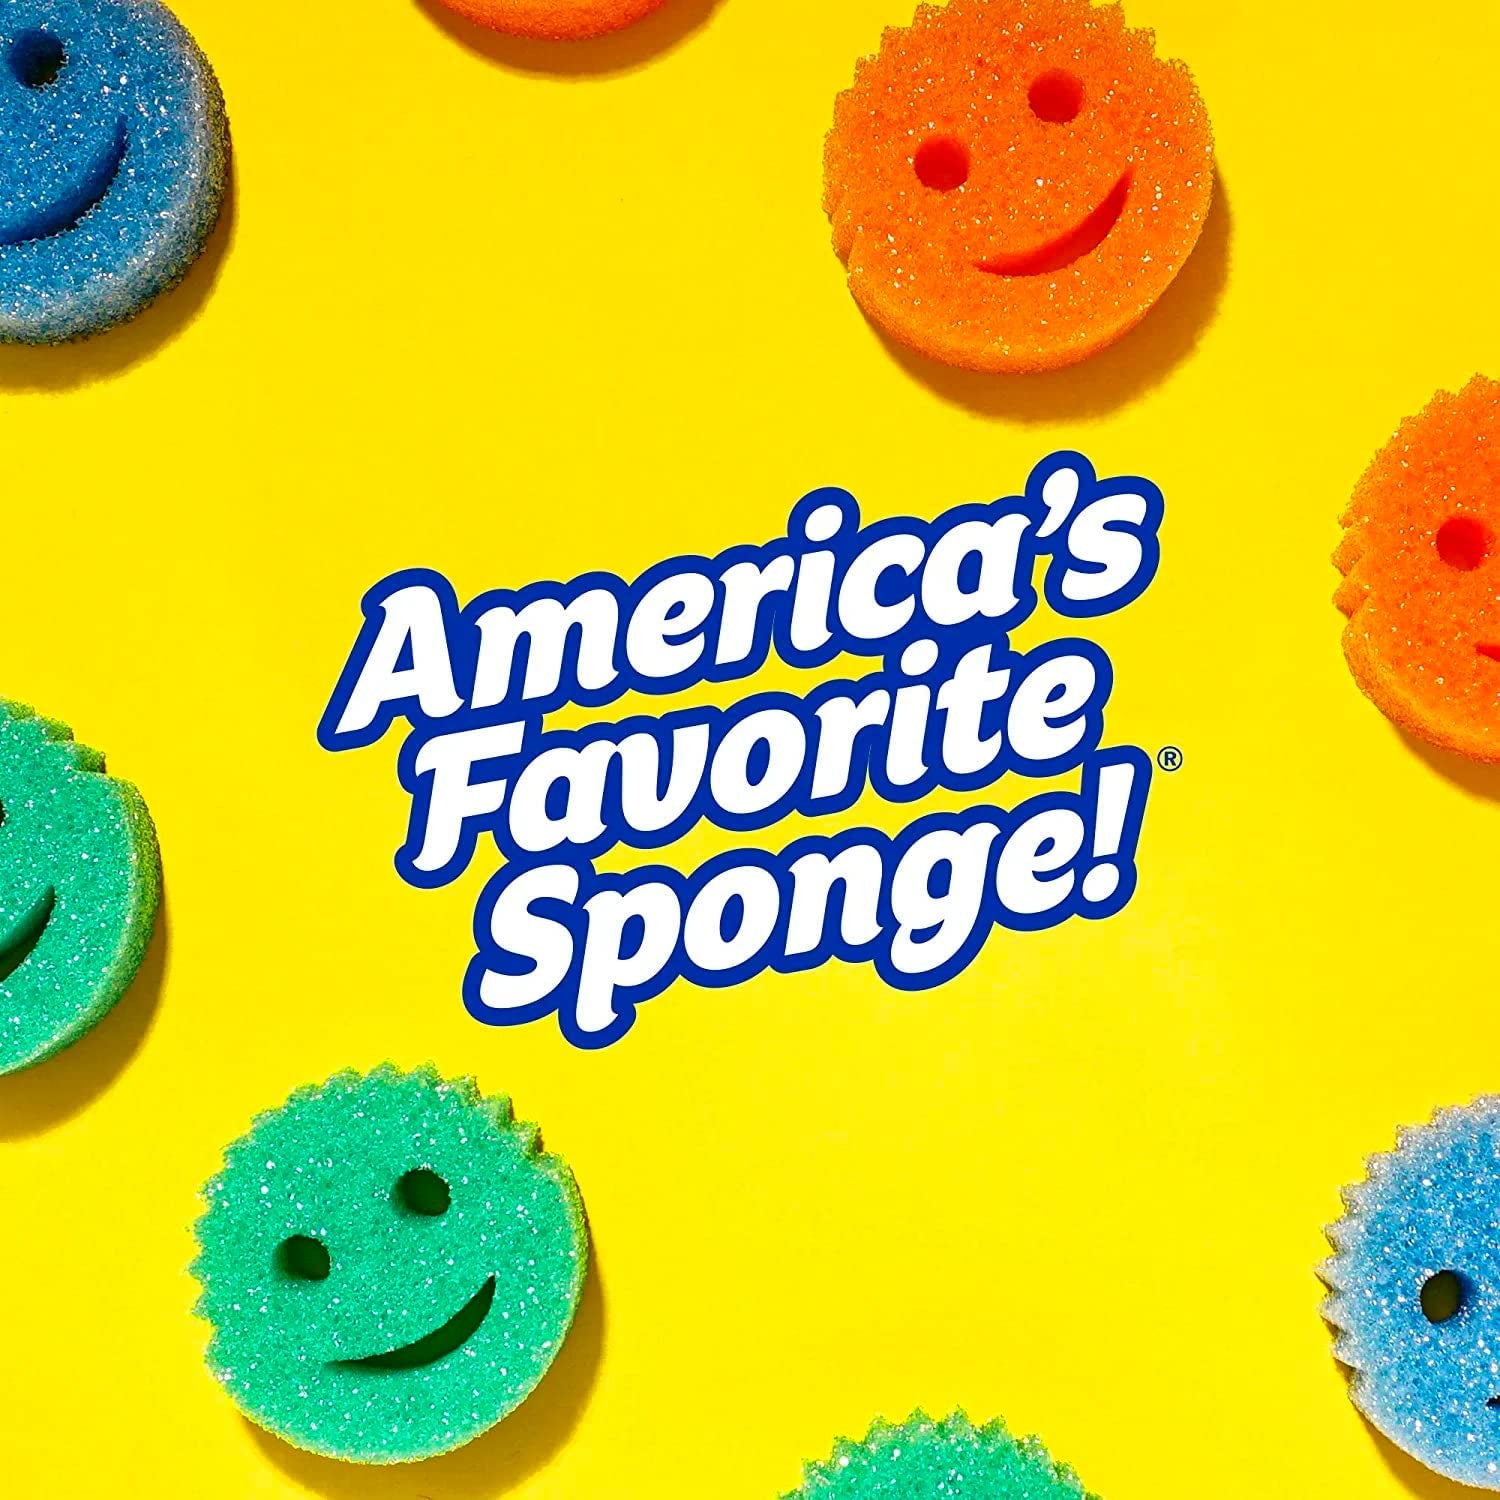 Special Edition Spring - Scratch-Free Multipurpose Dish Sponge - BPA Free & MadeHome Harmony EssentialsHome Harmony EssentialsKitchen & Bar Essentials
Temperature Controlled Scrub - With Scrub Daddy, unlike so many common kitchen sponge and dish scrubber products, you control your scrubbing power! Scrub Daddy’s FlSpecial Edition Spring - Scratch-Free Multipurpose Dish Sponge - BPA F